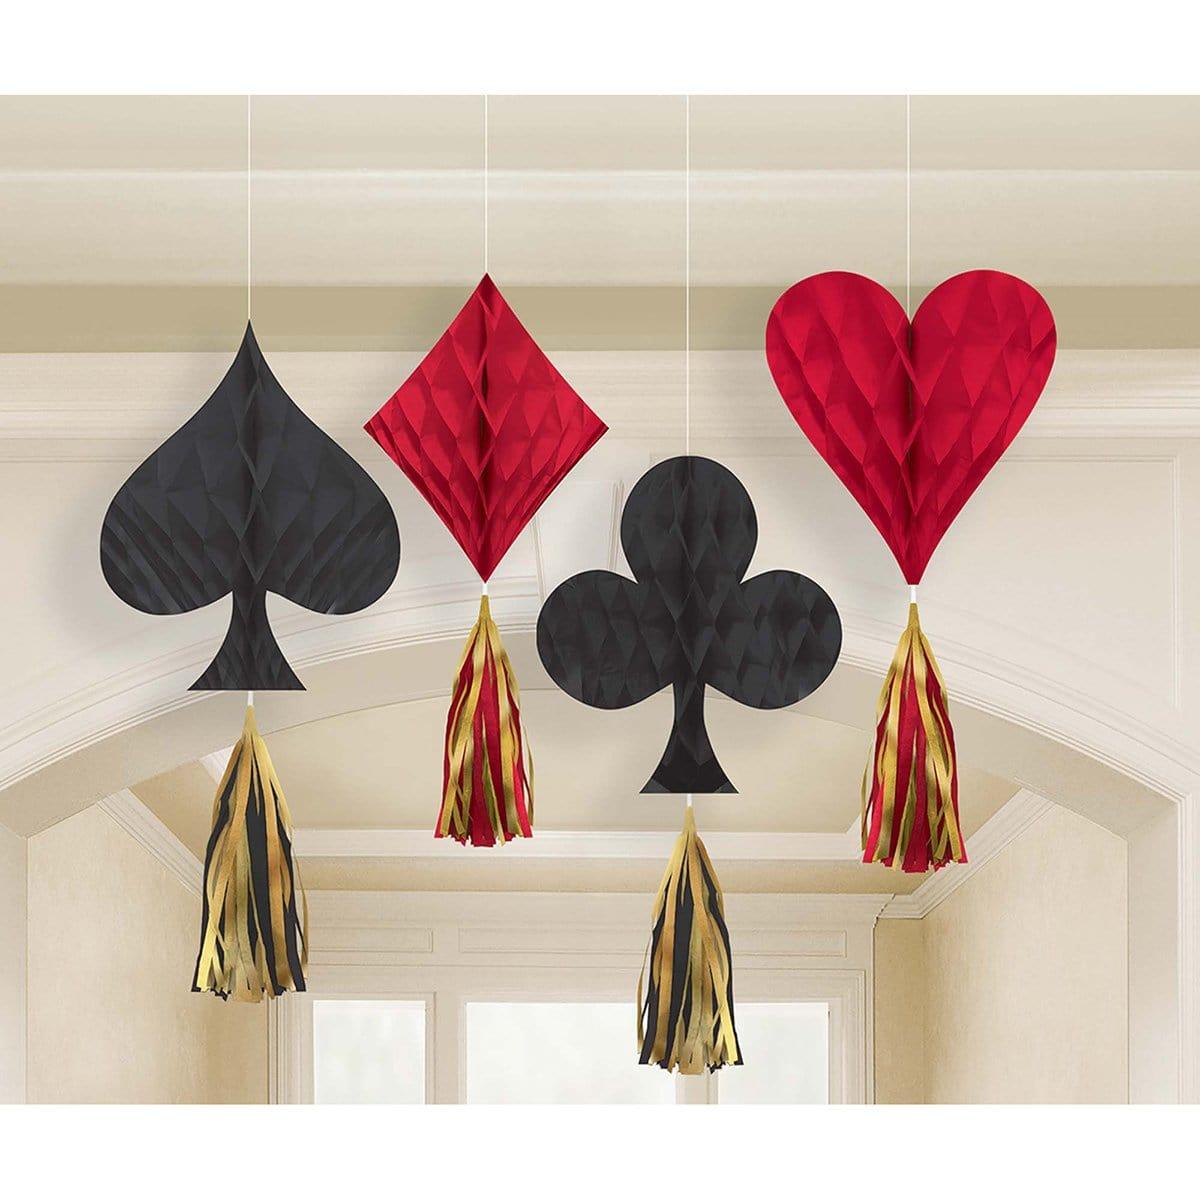 Buy Theme Party Roll The Dice Honeycomb Decorations with Tassels, 4 per Package sold at Party Expert